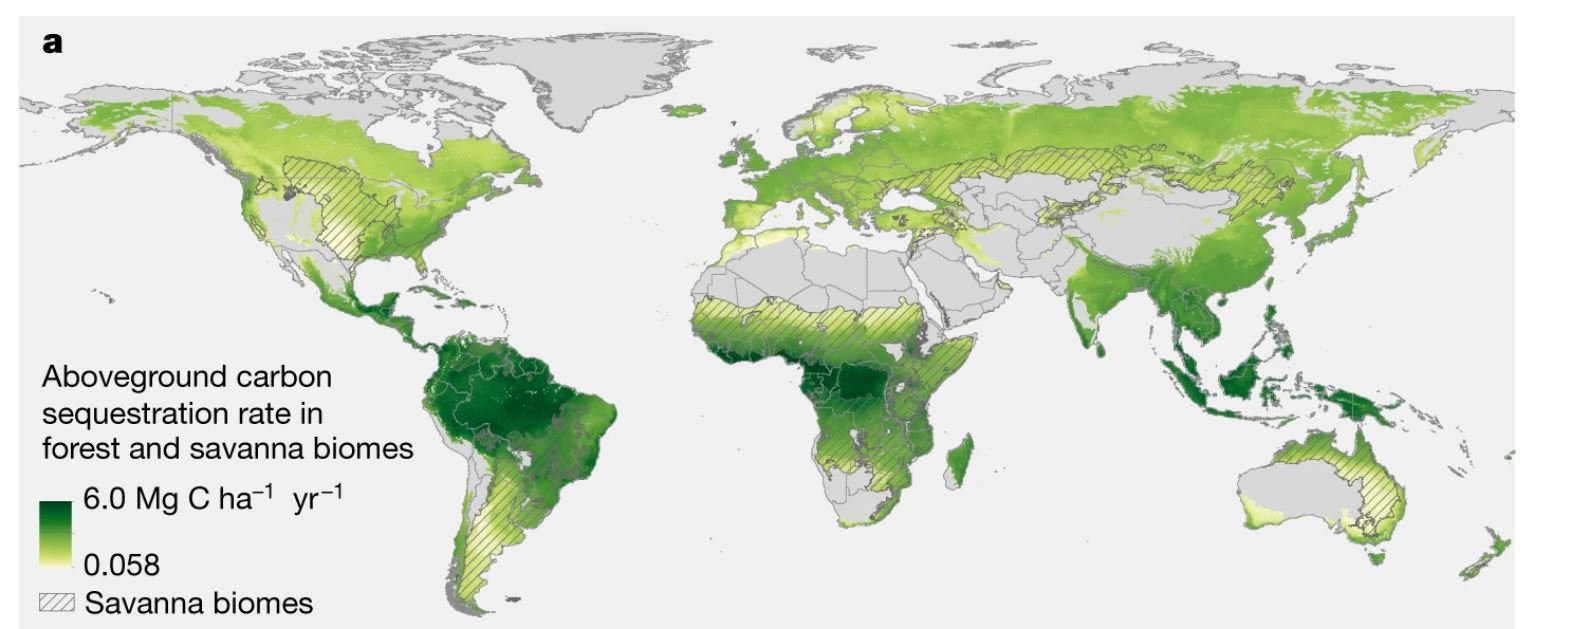 Predicted aboveground carbon accumulation rates (Mg C ha−1 yr−1) in naturally regrowing forests in forest (solid colours) and savanna biomes (hatched colours). We denote savanna biomes differently to note that many of these areas are not appropriate for forests and that restoration of forest cover should proceed with particular caution in these biomes. Figure: Susan C. Cook-Patton et al.